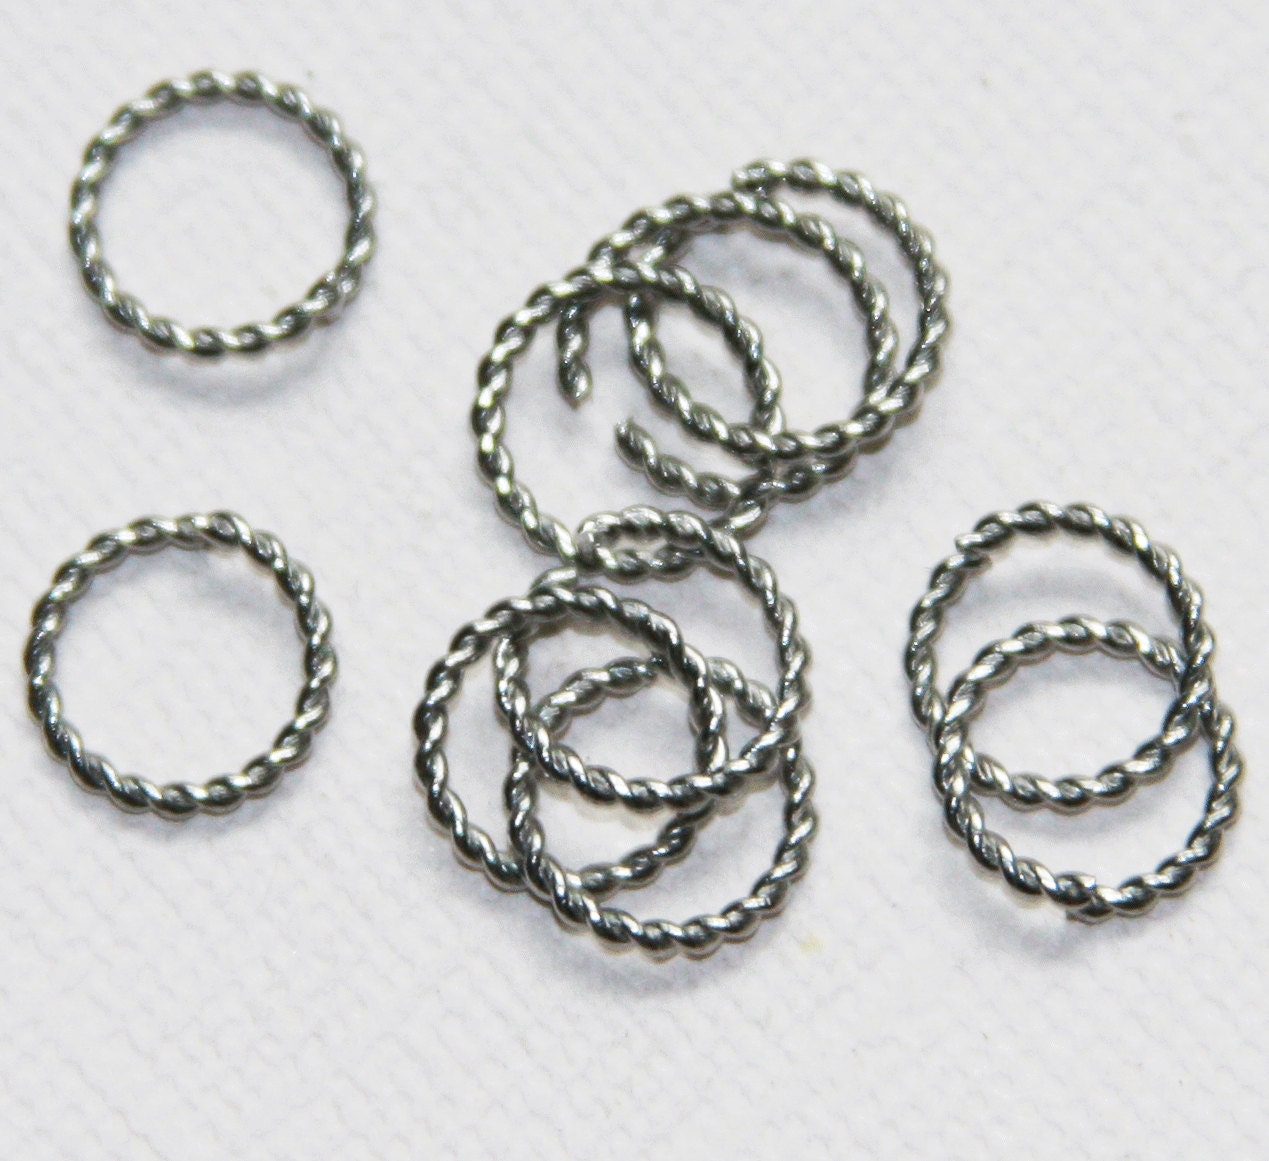 925 Sterling silver Jump Rings,(SOLID)Opened & Closed Jump rings soldered,  Round, 3mm, 4mm, 5mm, 6mm, 7mm, 8mm, 10mm.